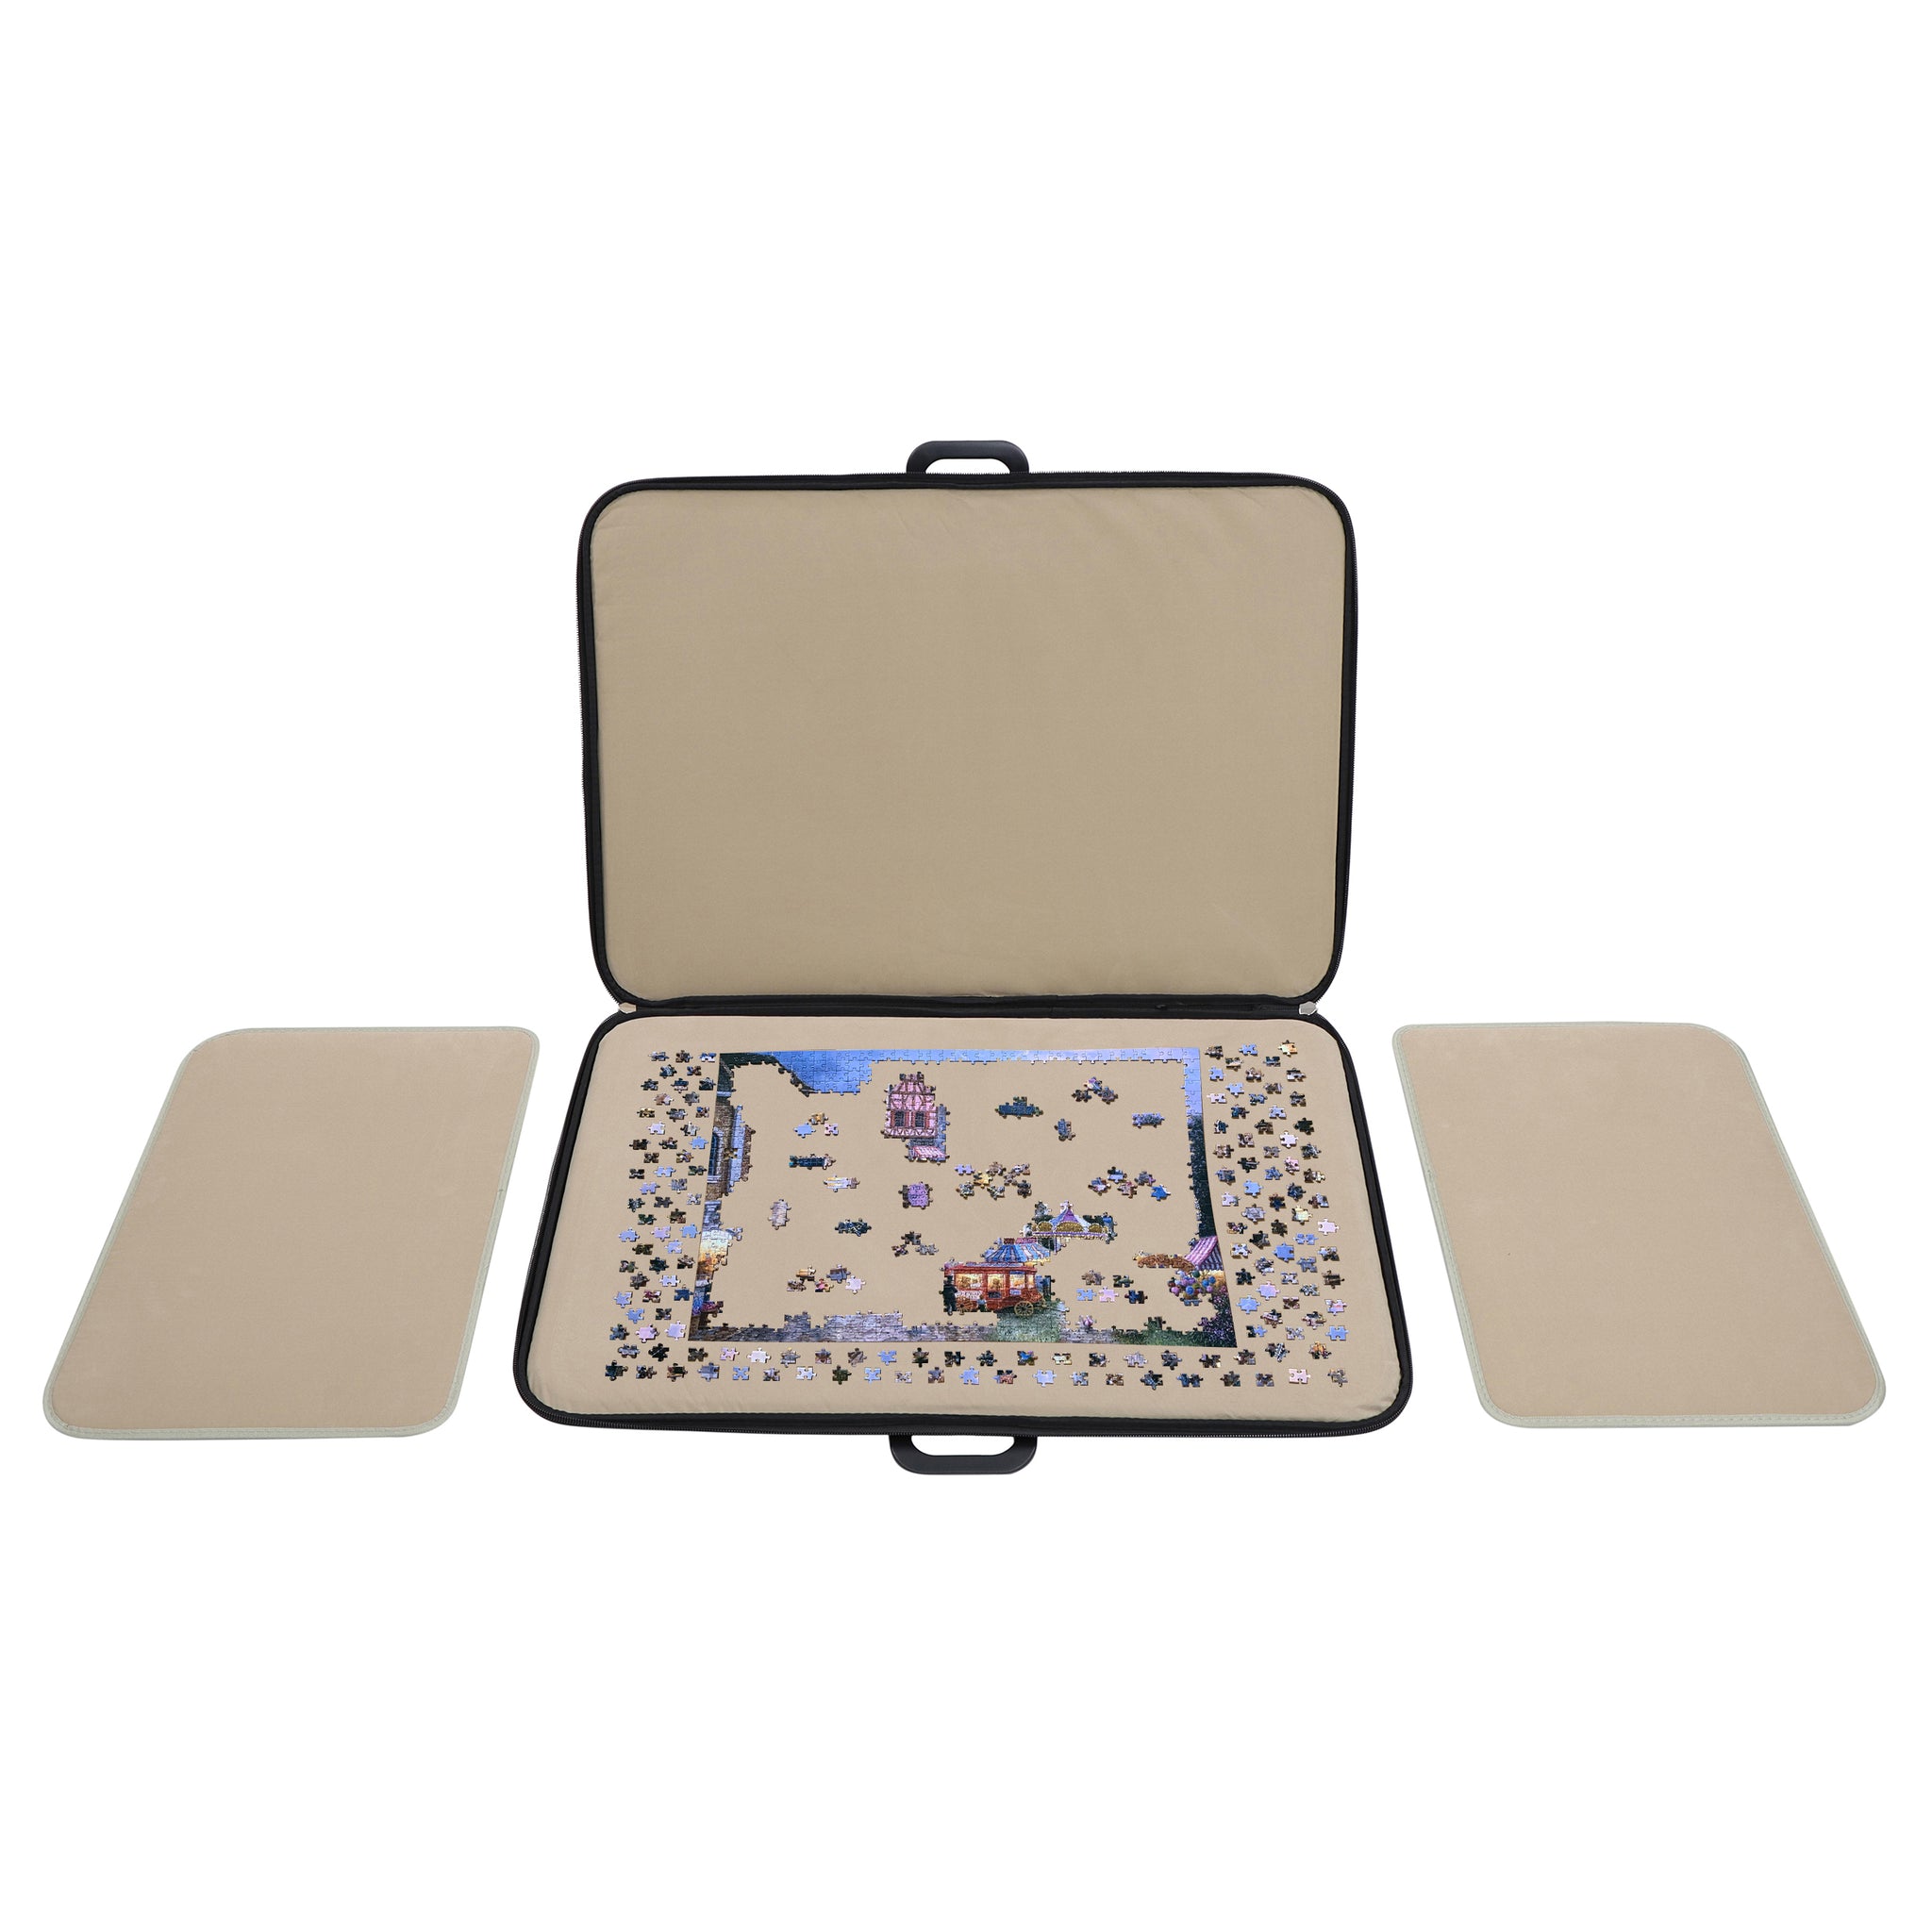 Jumbo Portapuzzle Puzzle Mates Accessories Jigsaw Boards, Sorters, Puzzle  Mats